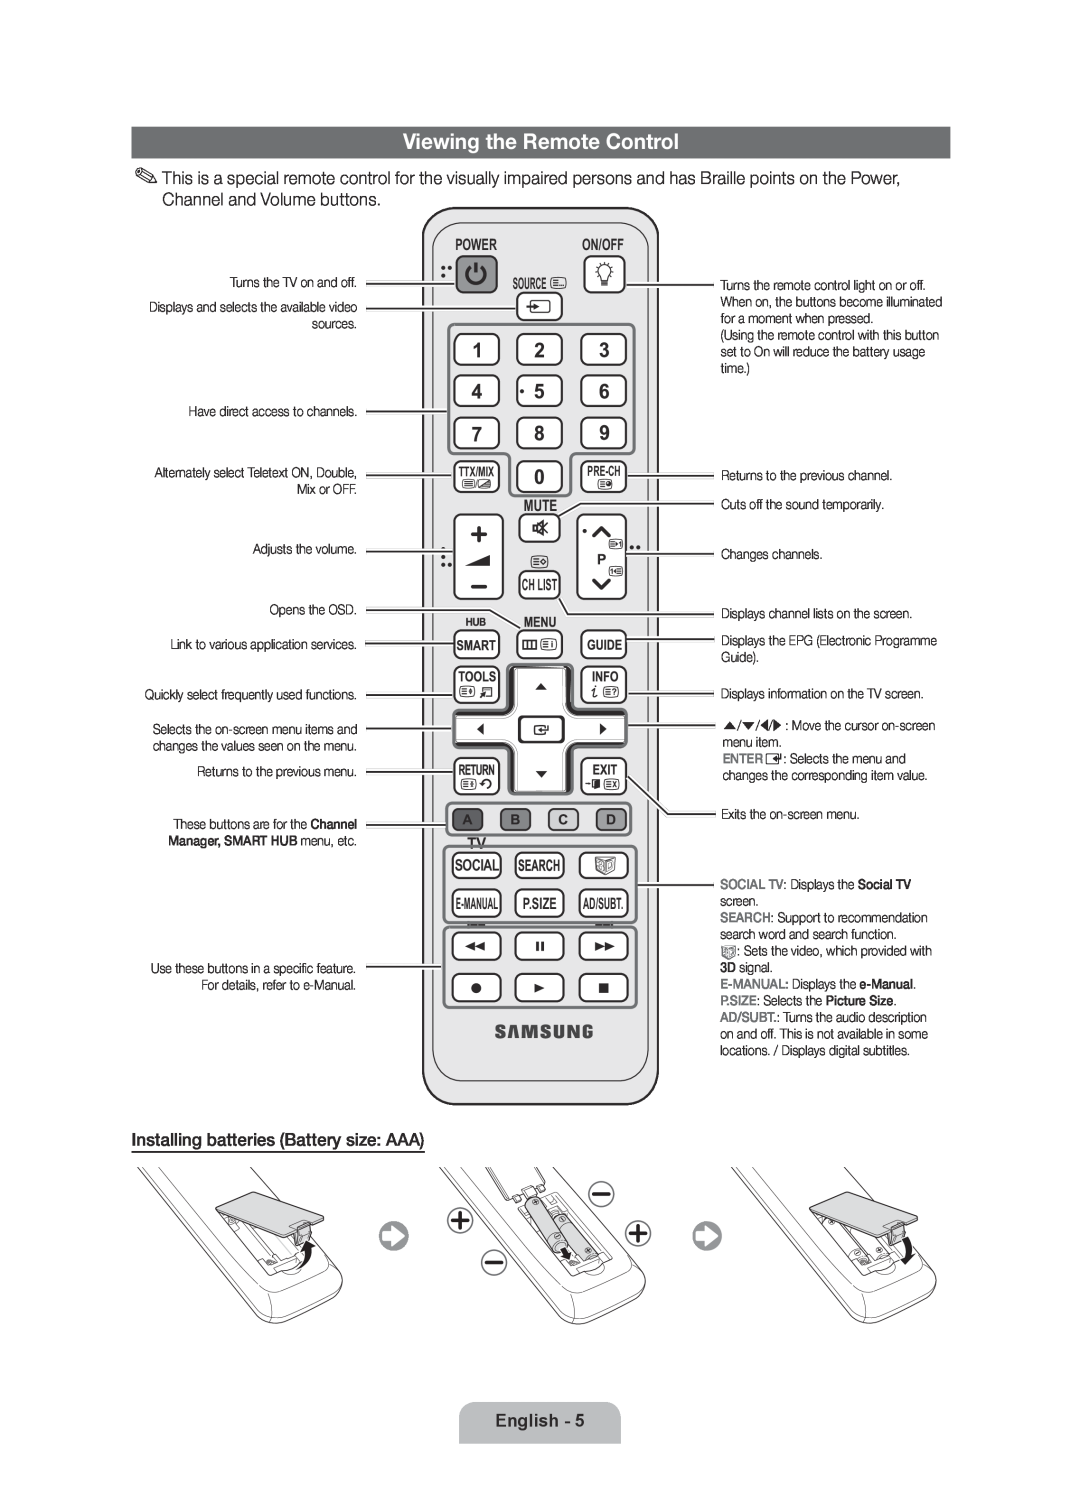 Samsung UE37D6510WSXZG Viewing the Remote Control, English, Power On/Off Source, Mute Ch List Tv Social, Ttx/Mixpre-Ch 